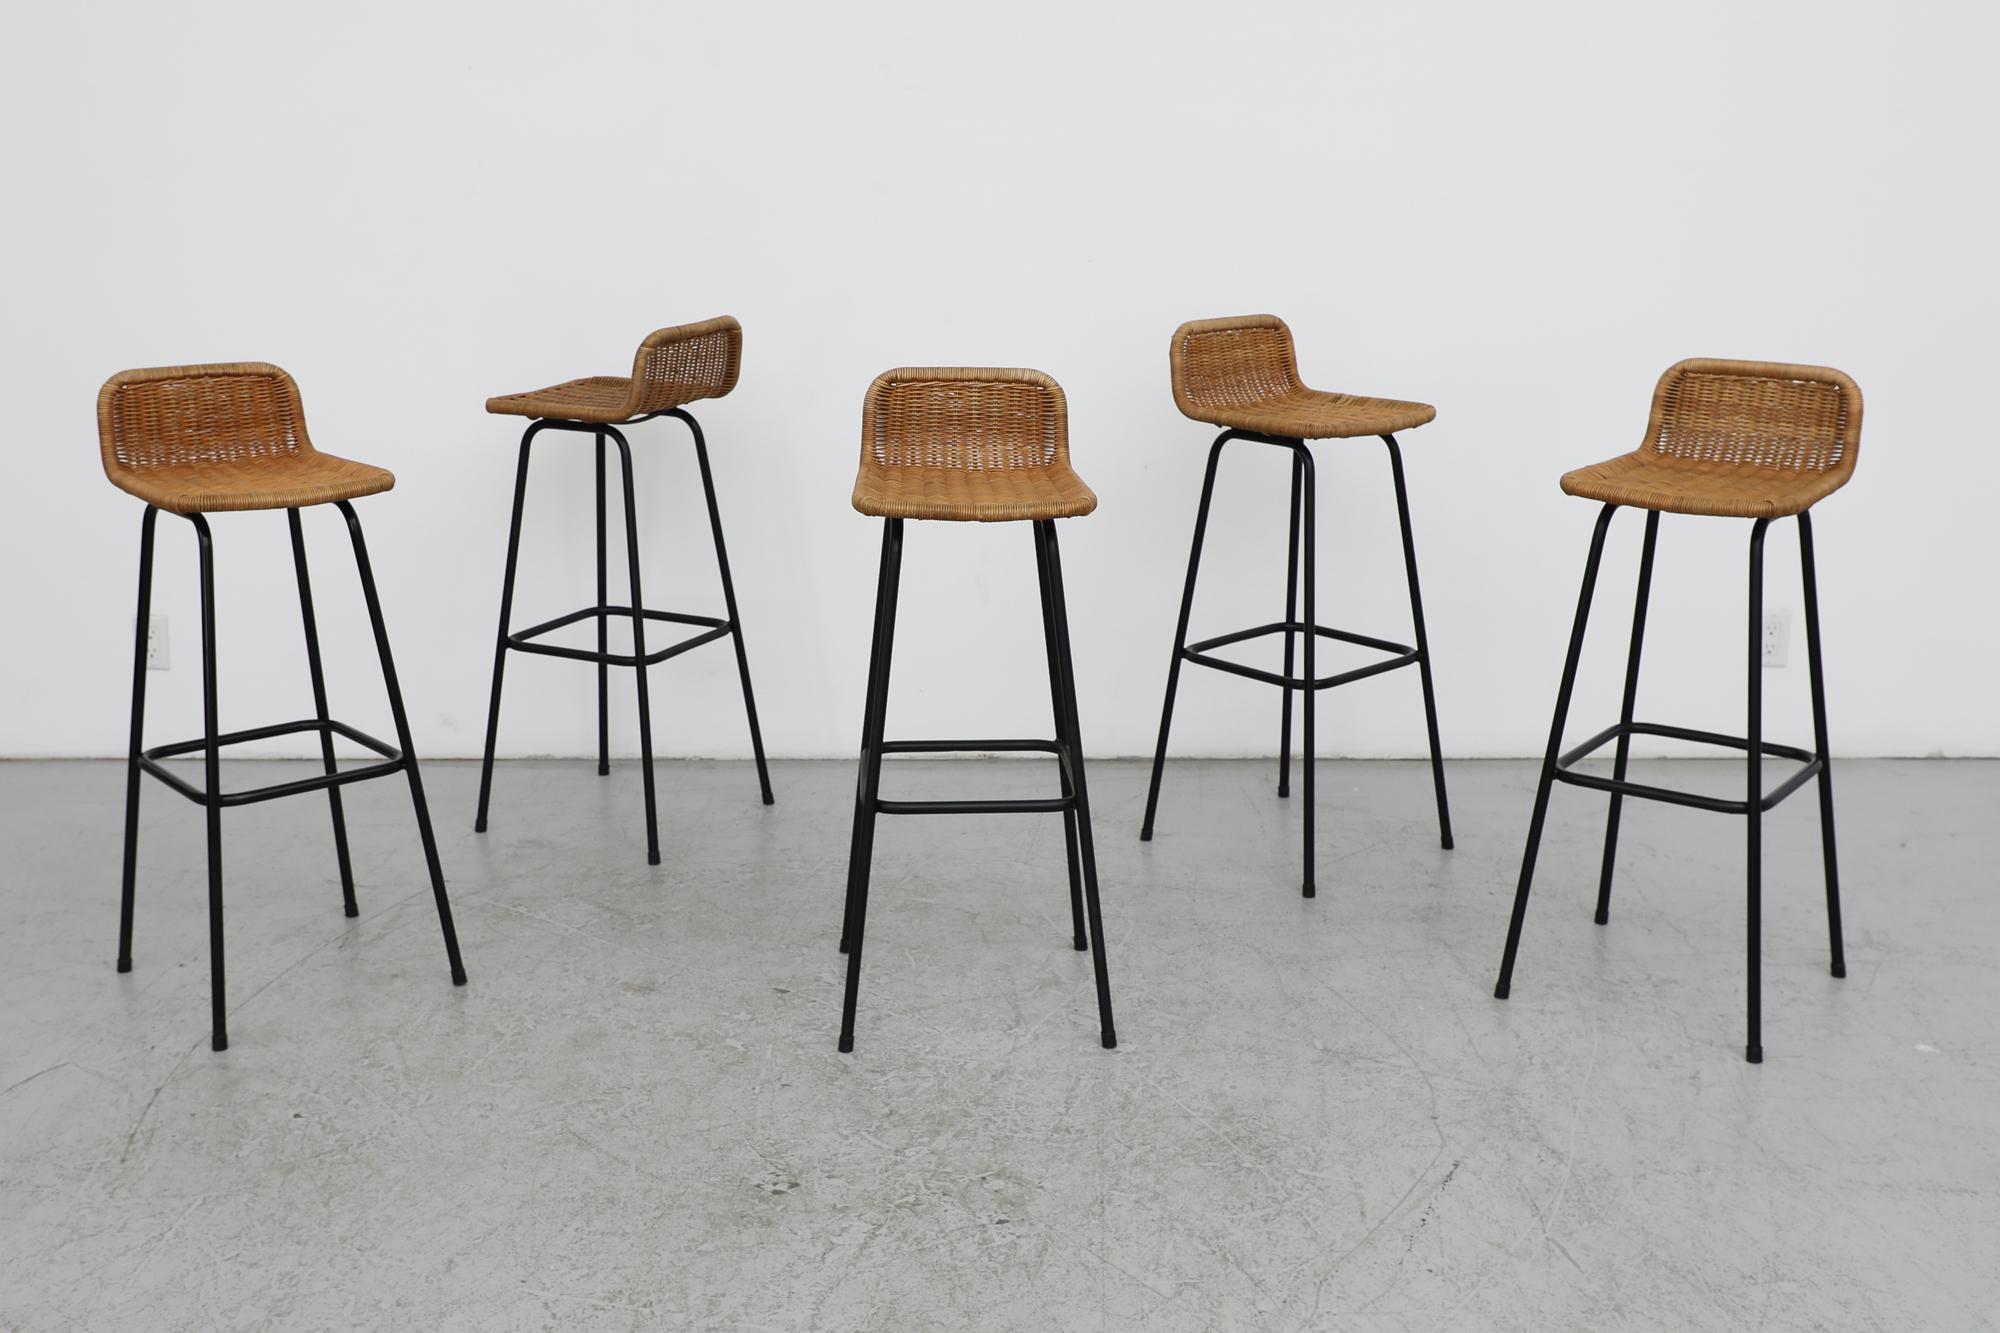 Mid-Century, Charlotte Perriand style wicker bar stools with black enameled legs as designed by Dutch post war designer Dirk van Sliedregt for Rohe Noordwolde, a furniture maker that was widely renowned for their use of wicker, rattan bamboo in